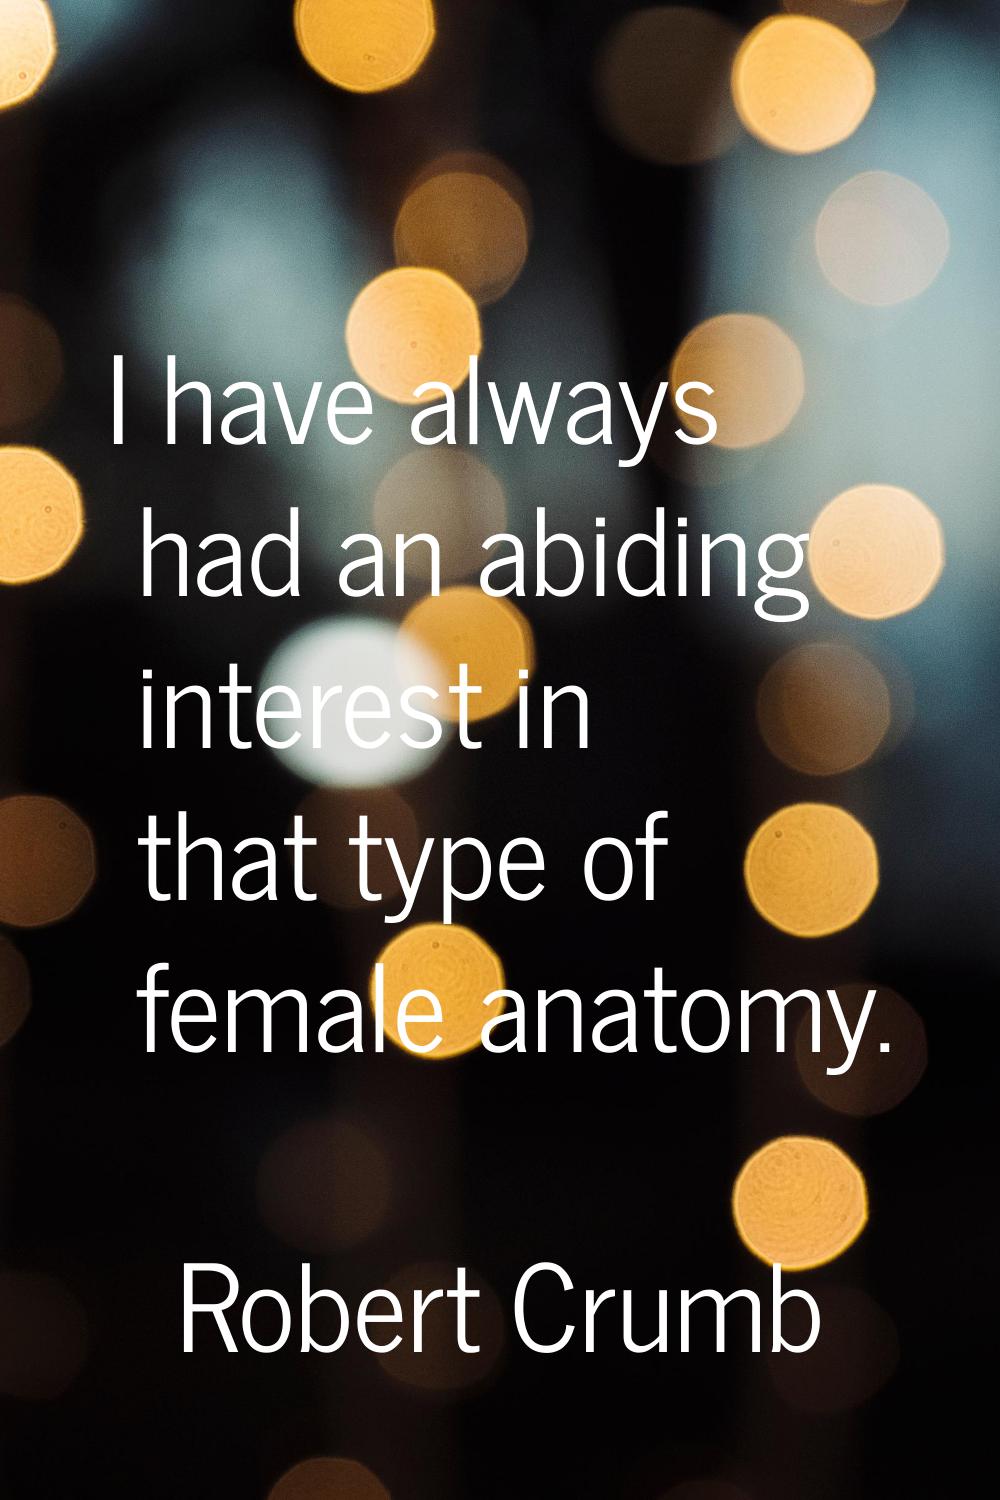 I have always had an abiding interest in that type of female anatomy.